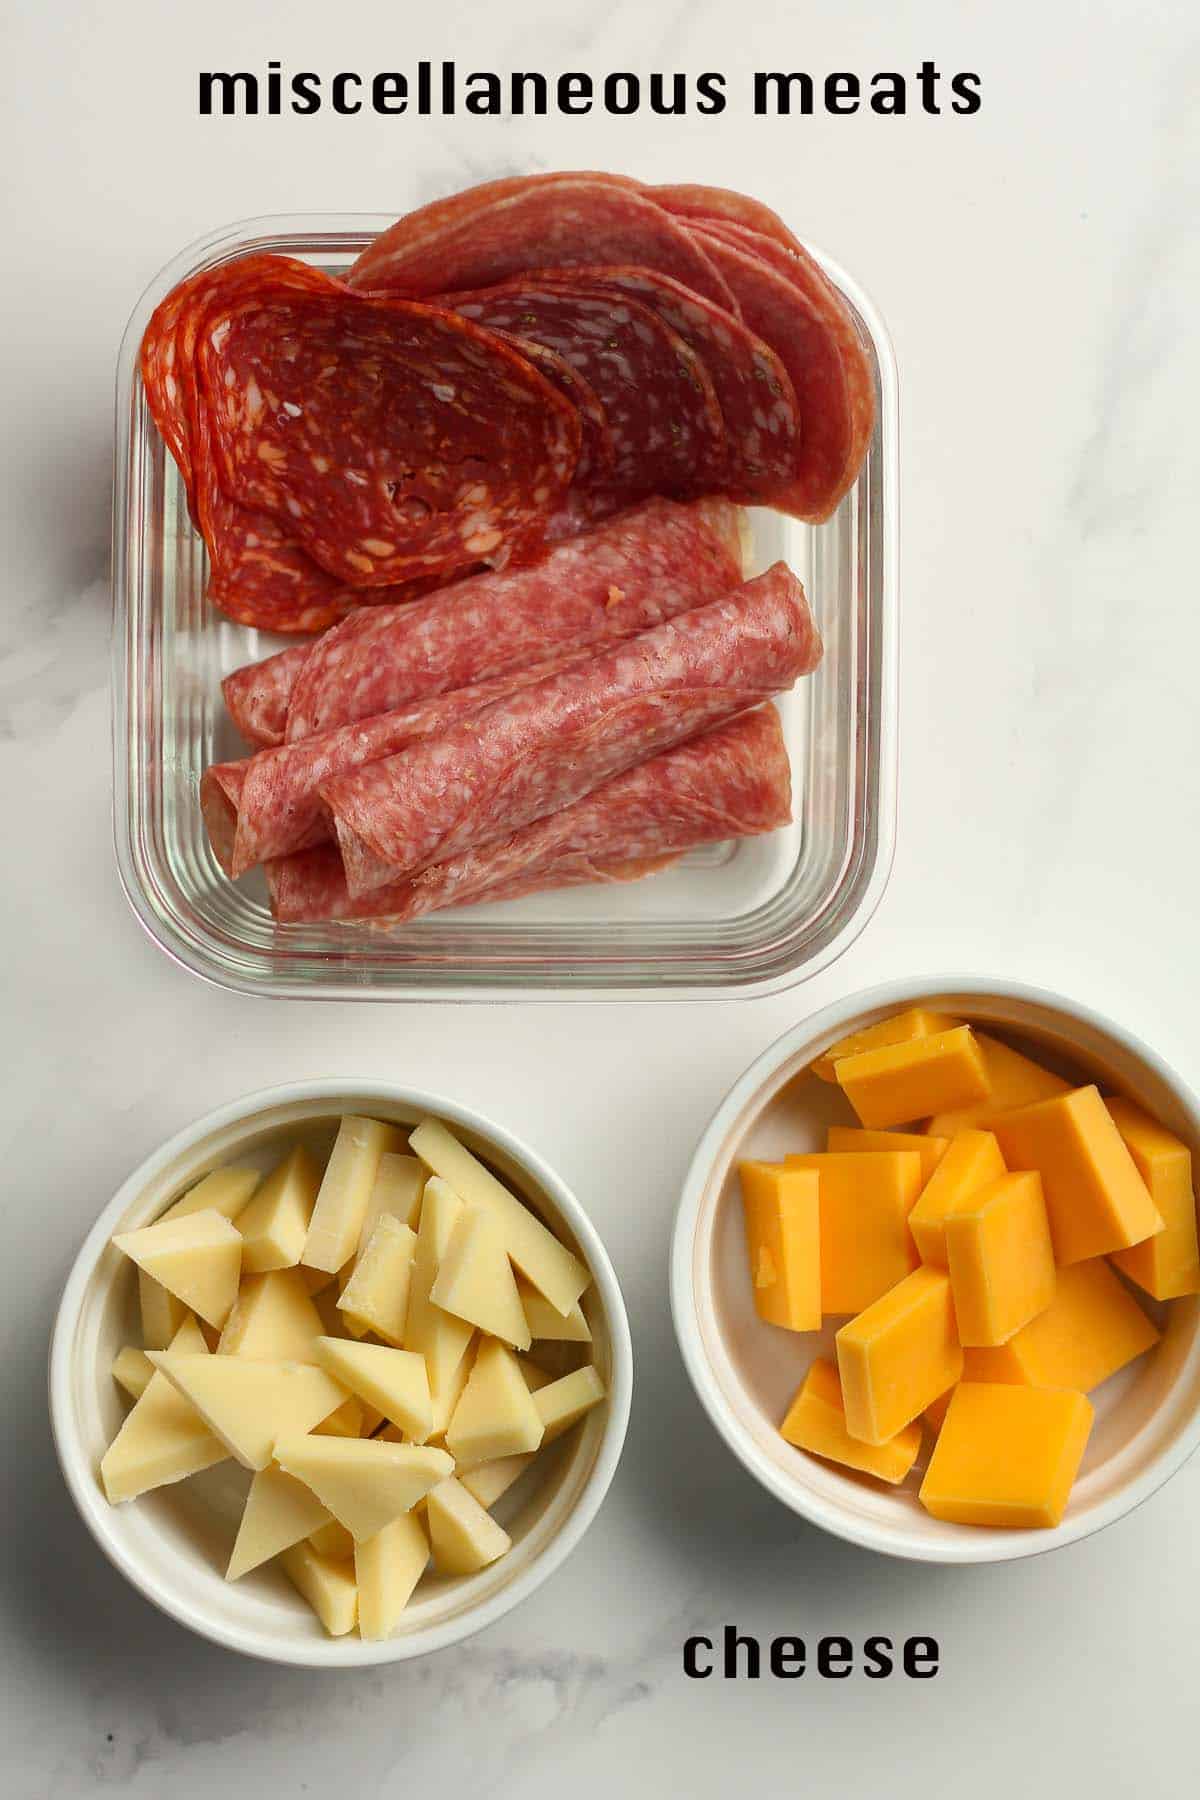 Bowls of meats and cheese.